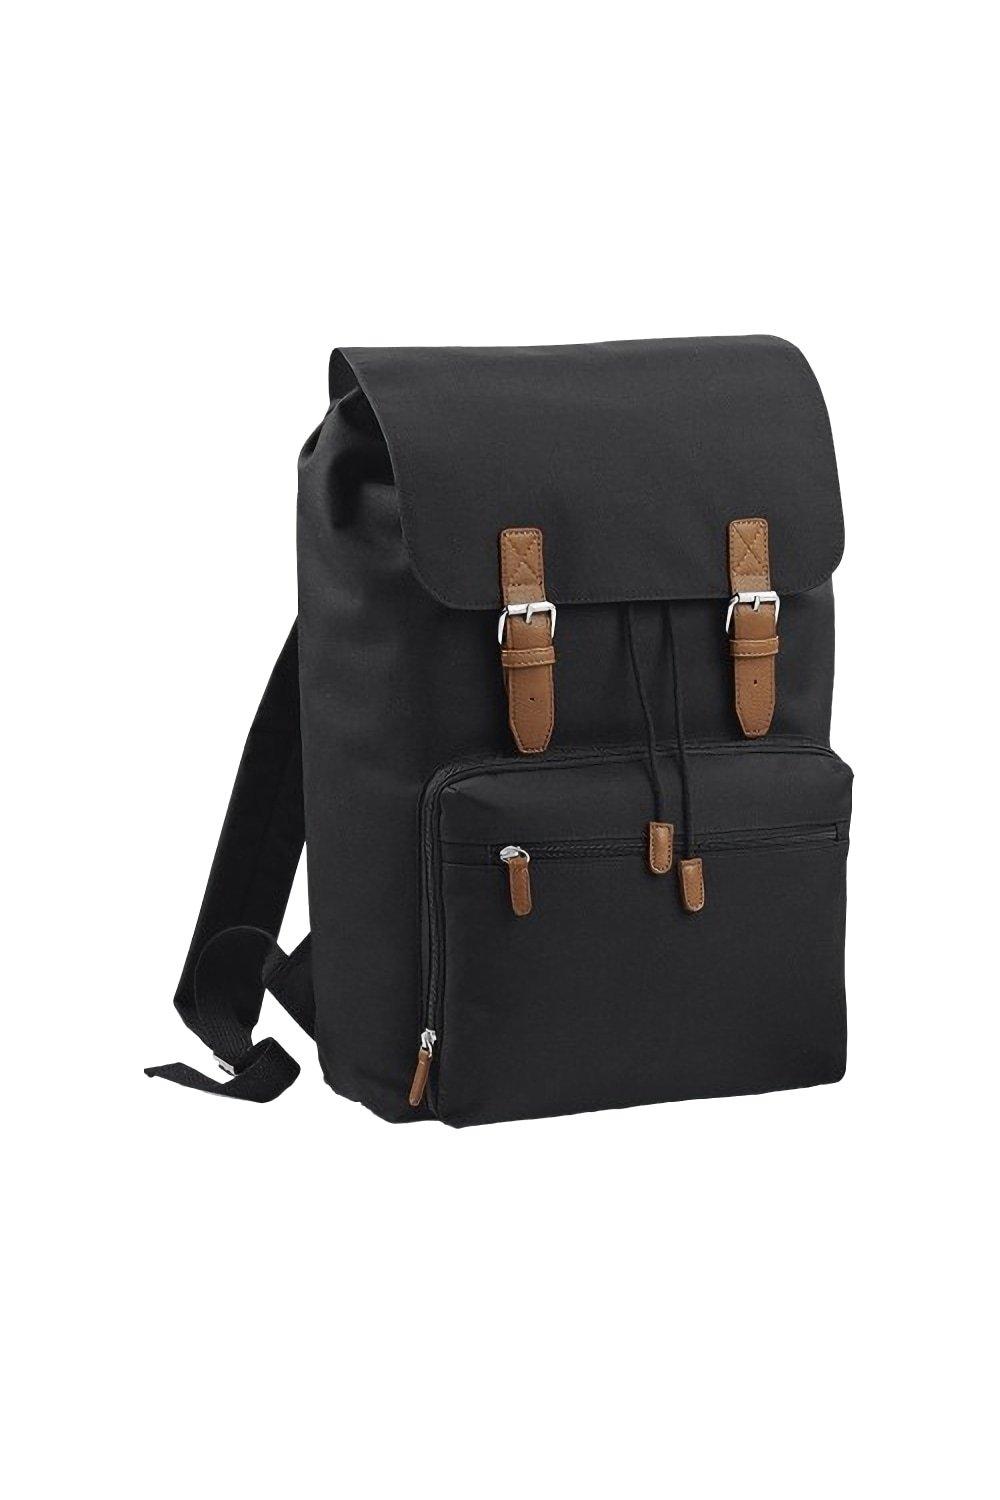 Heritage Laptop Backpack Bag (Up To 17inch Laptop)